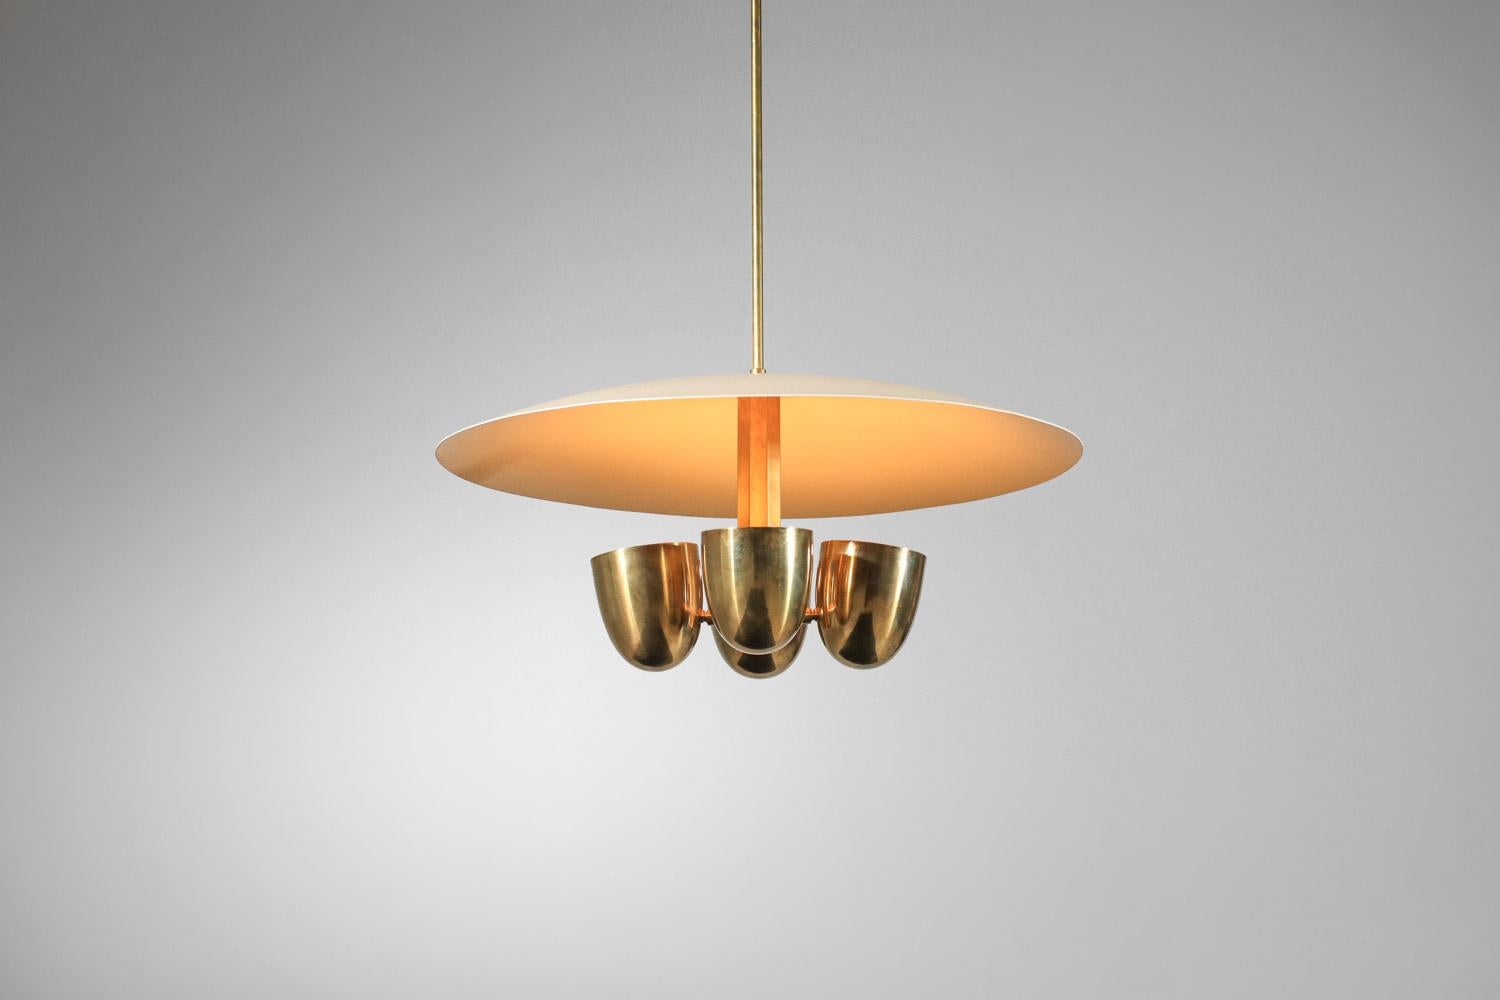 French Modern vintage style pendant light in solid brass and lacquered metal For Sale